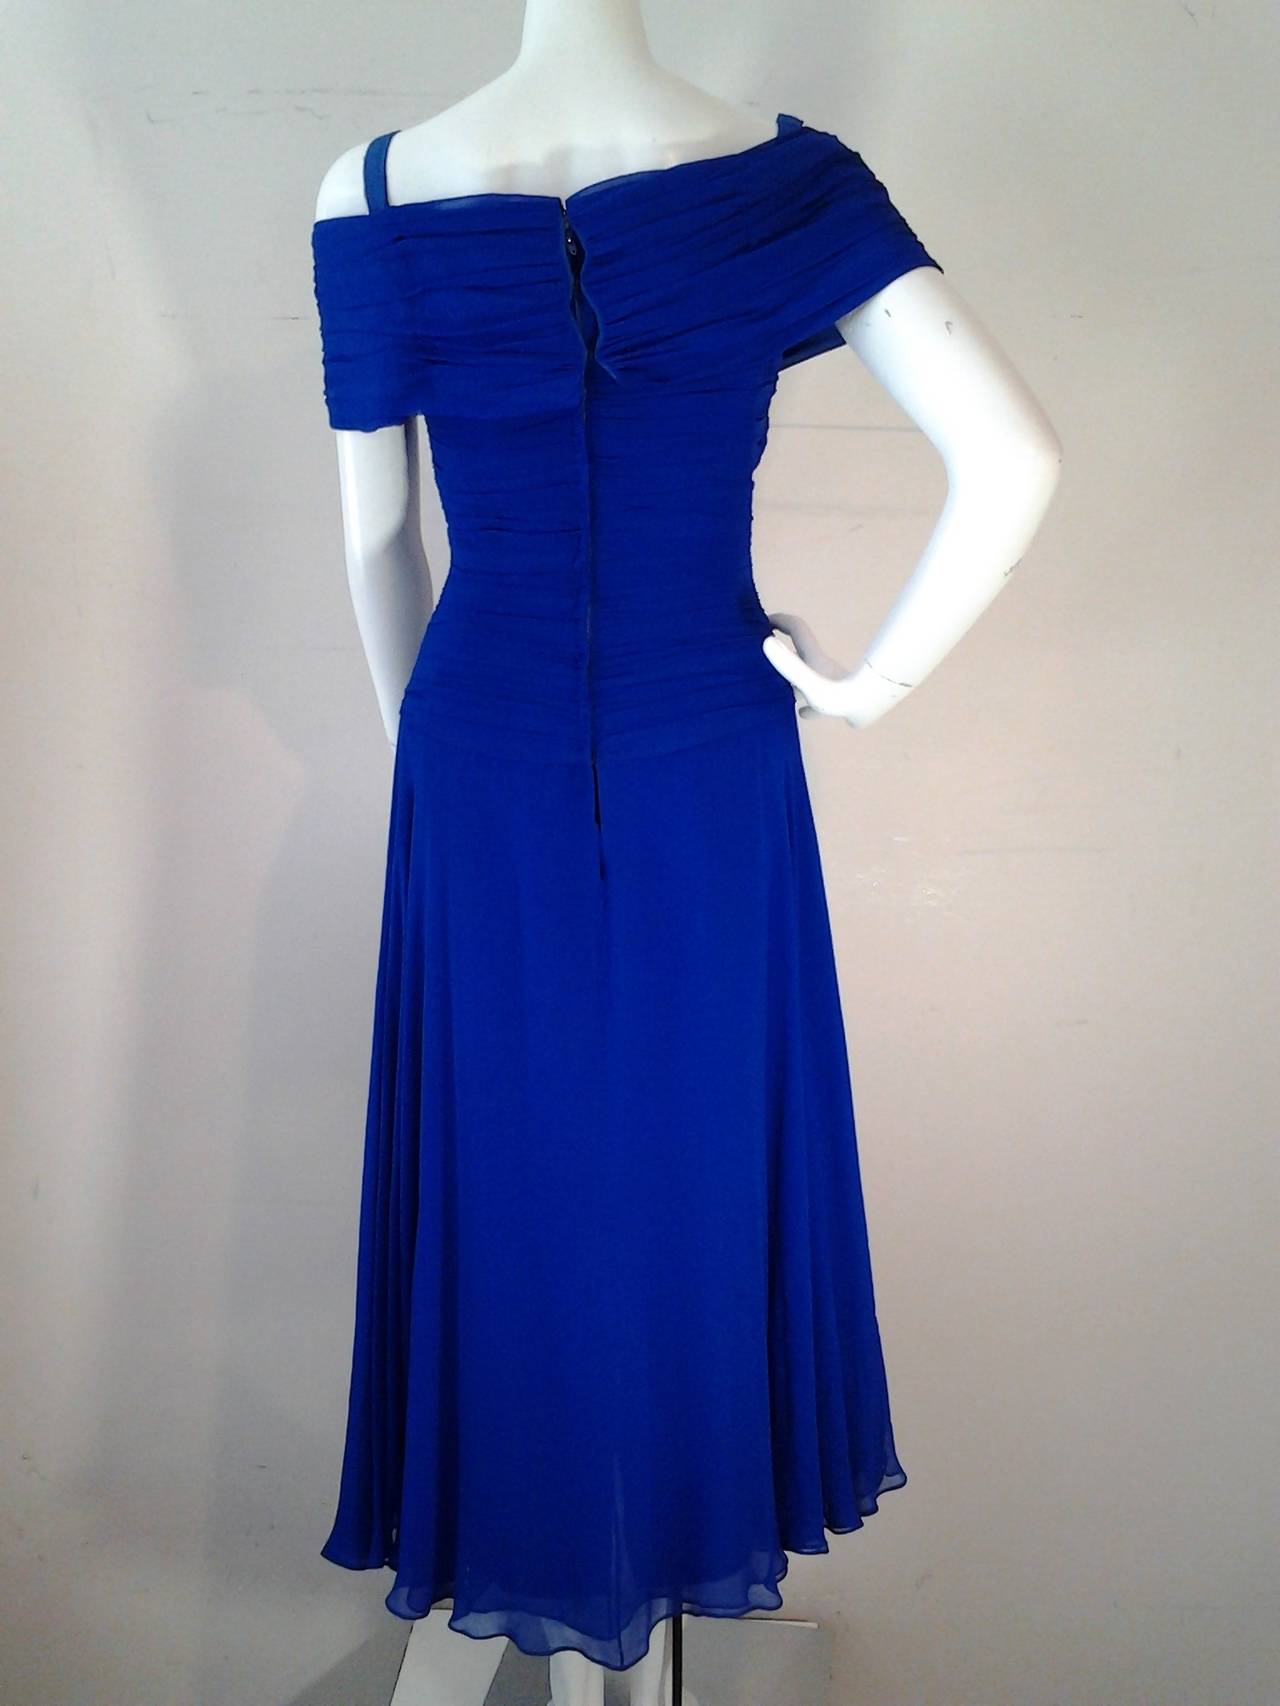 A wonderfully vibrant cobalt blue 1980s Arnold Scaasi silk chiffon gown with lots of ruched fabric in the flowing skirt and a structured 